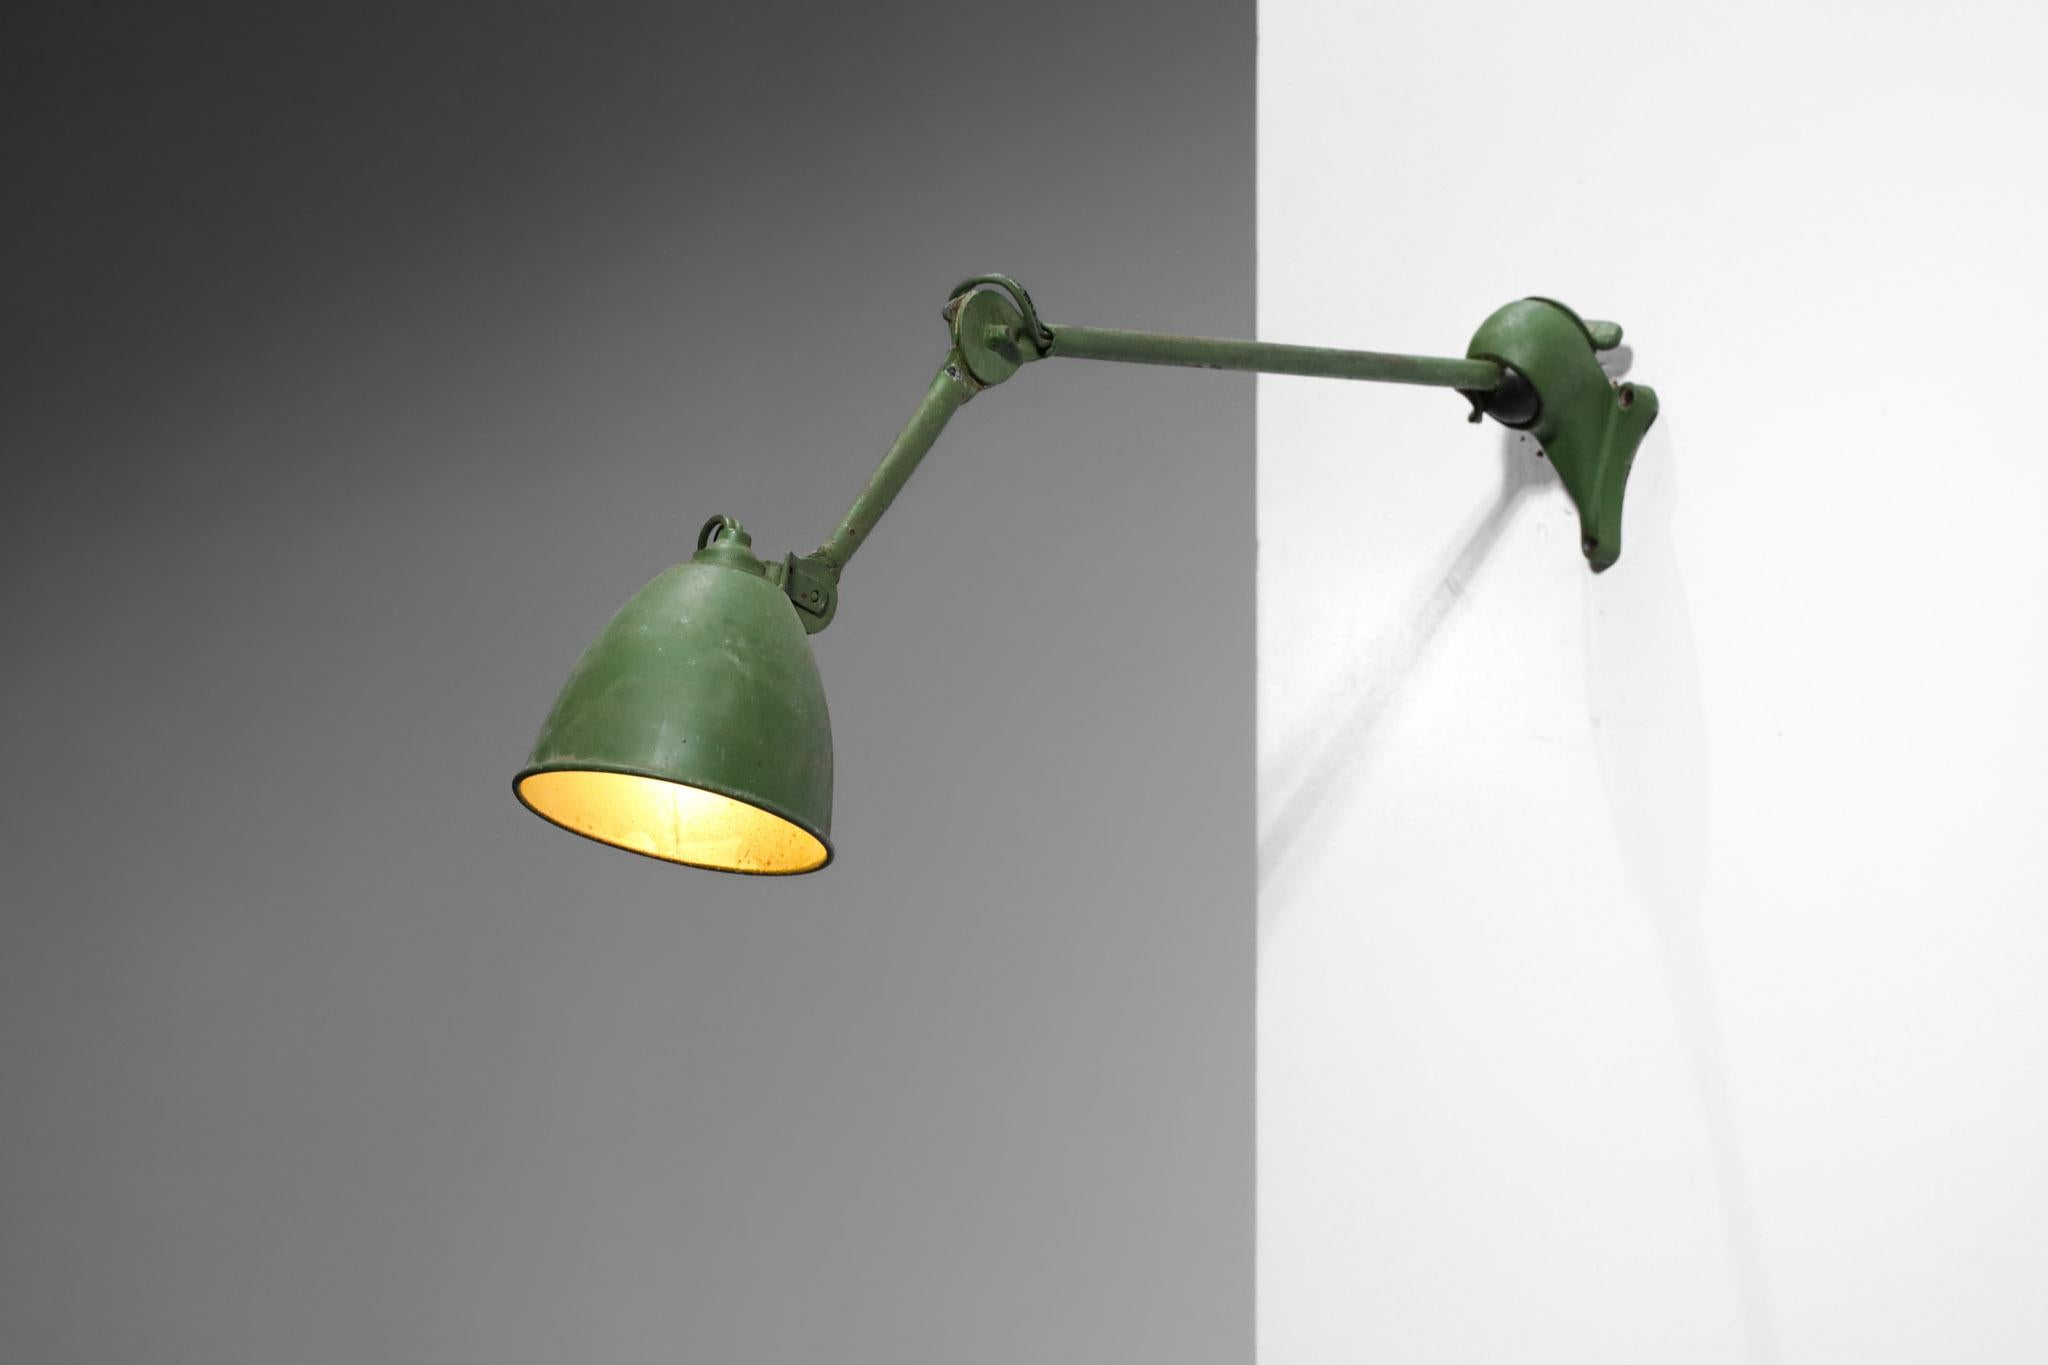 French workshop lamp created by Albert Albin Gras in the 50s. Metal structure, lampshade and articulated arms, all in green (original paint). Very nice patina of time on the whole lamp (see photos). Model of lamp very often used by Le Corbusier in